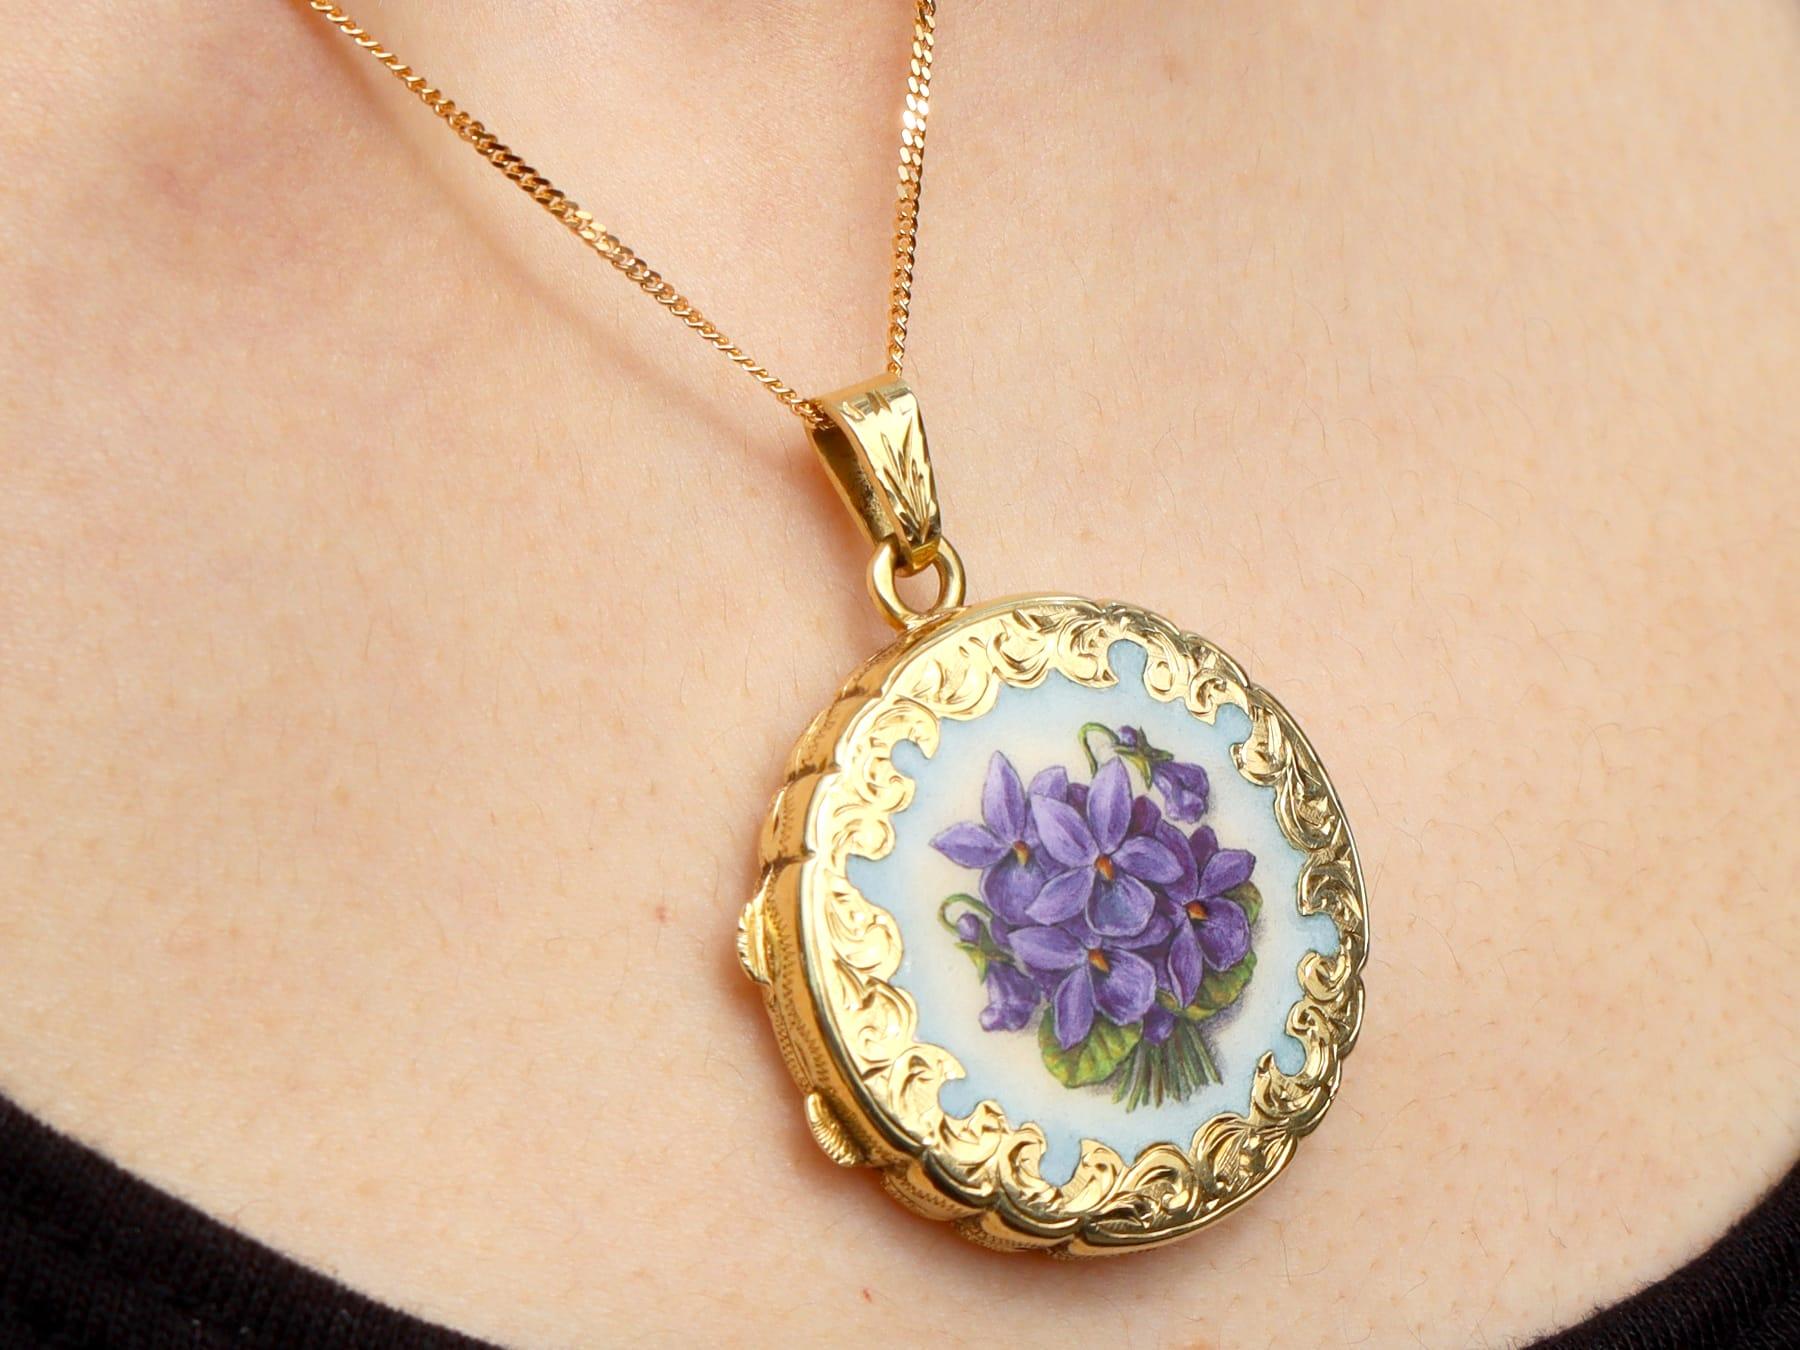 Antique 1930s Enamel and 14k Yellow Gold Pendant / Locket For Sale 8